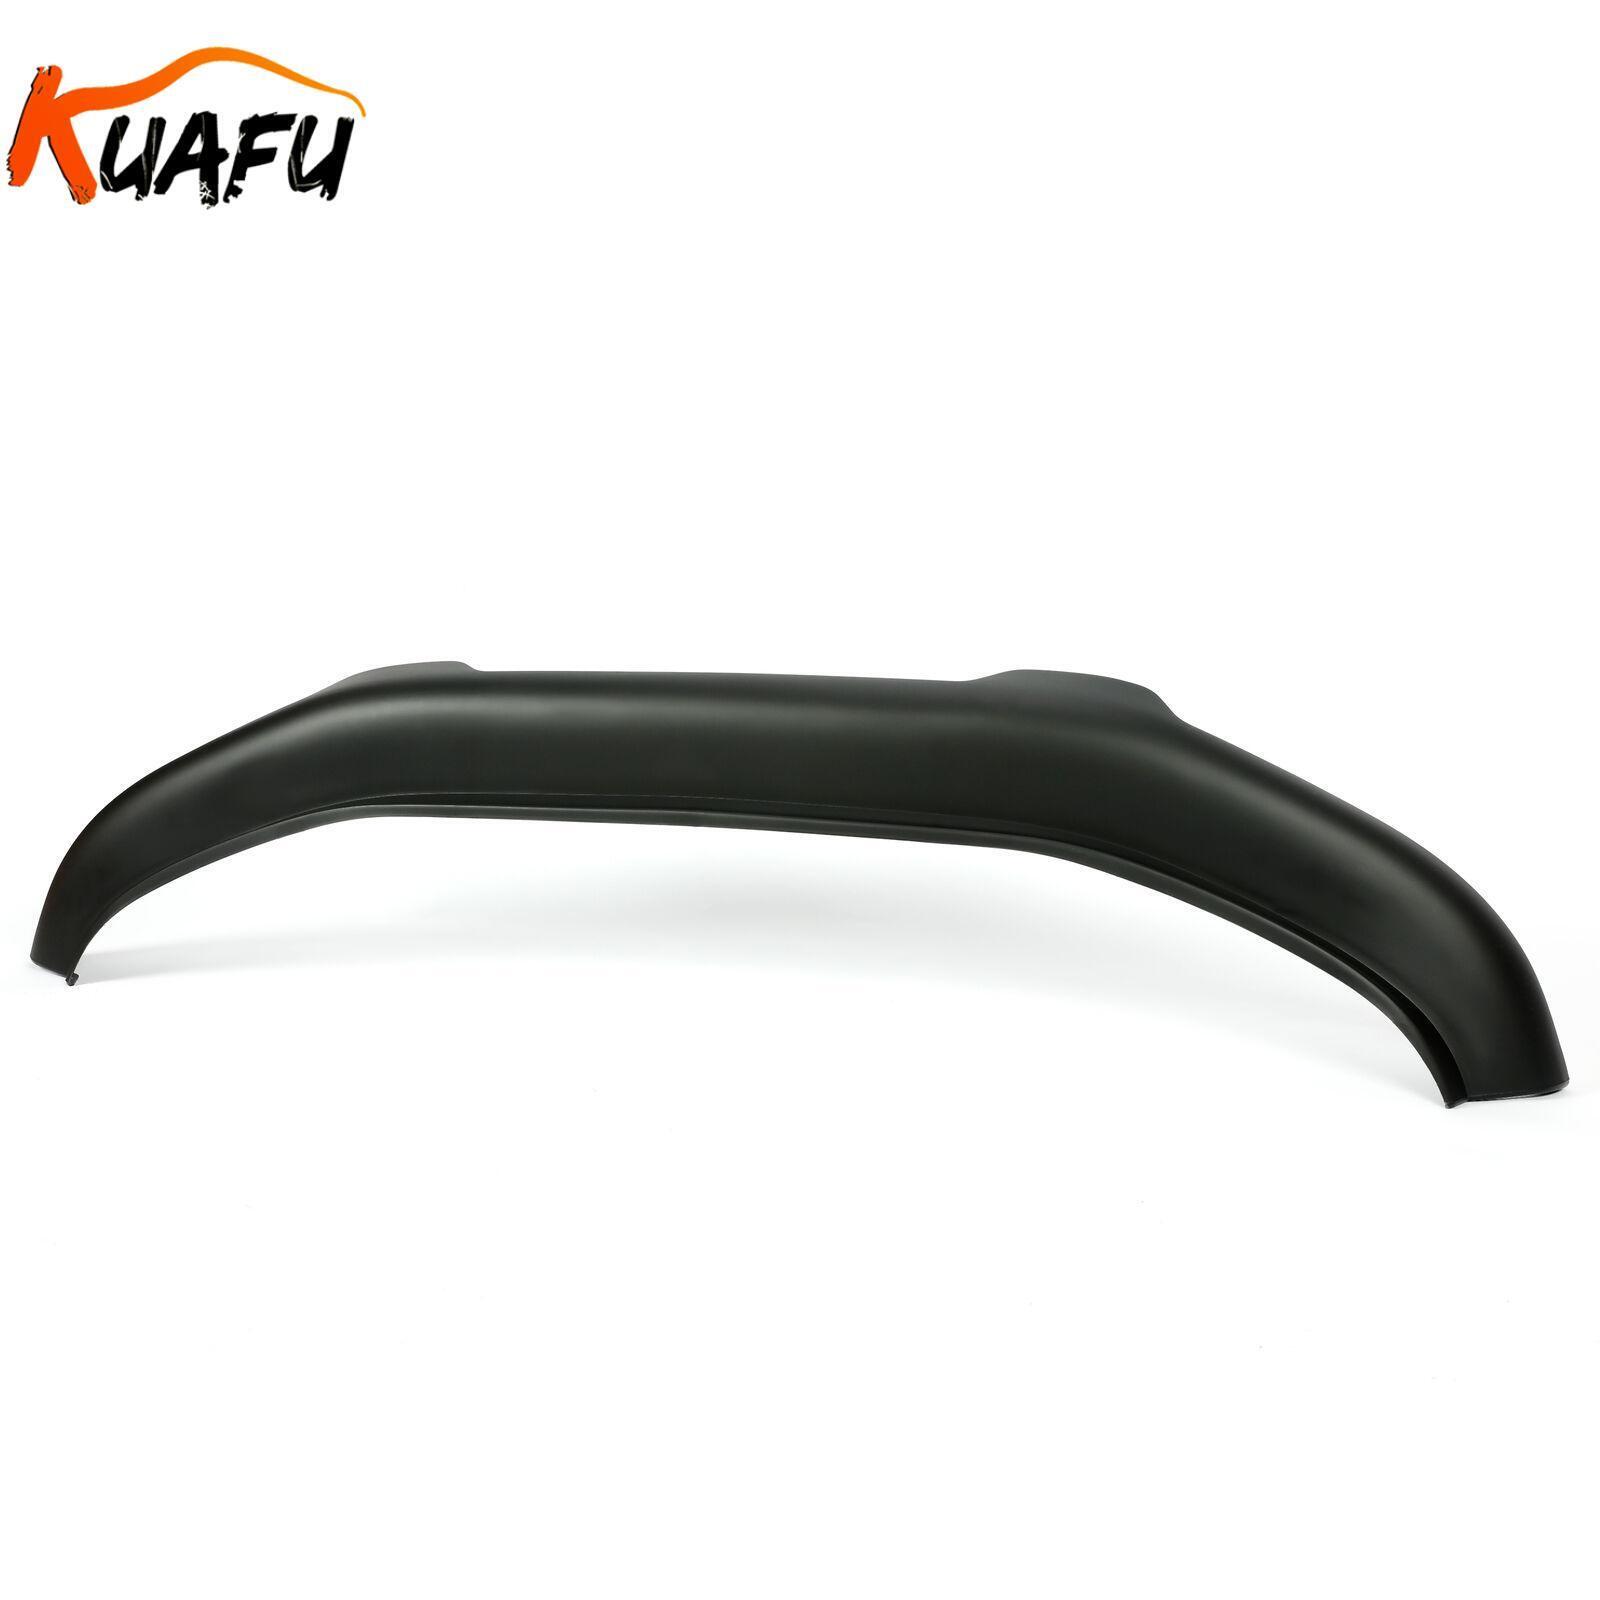 KUAFU Front Lower Valance Air Deflector Spoiler For Ford F-150 F150 2006-2008